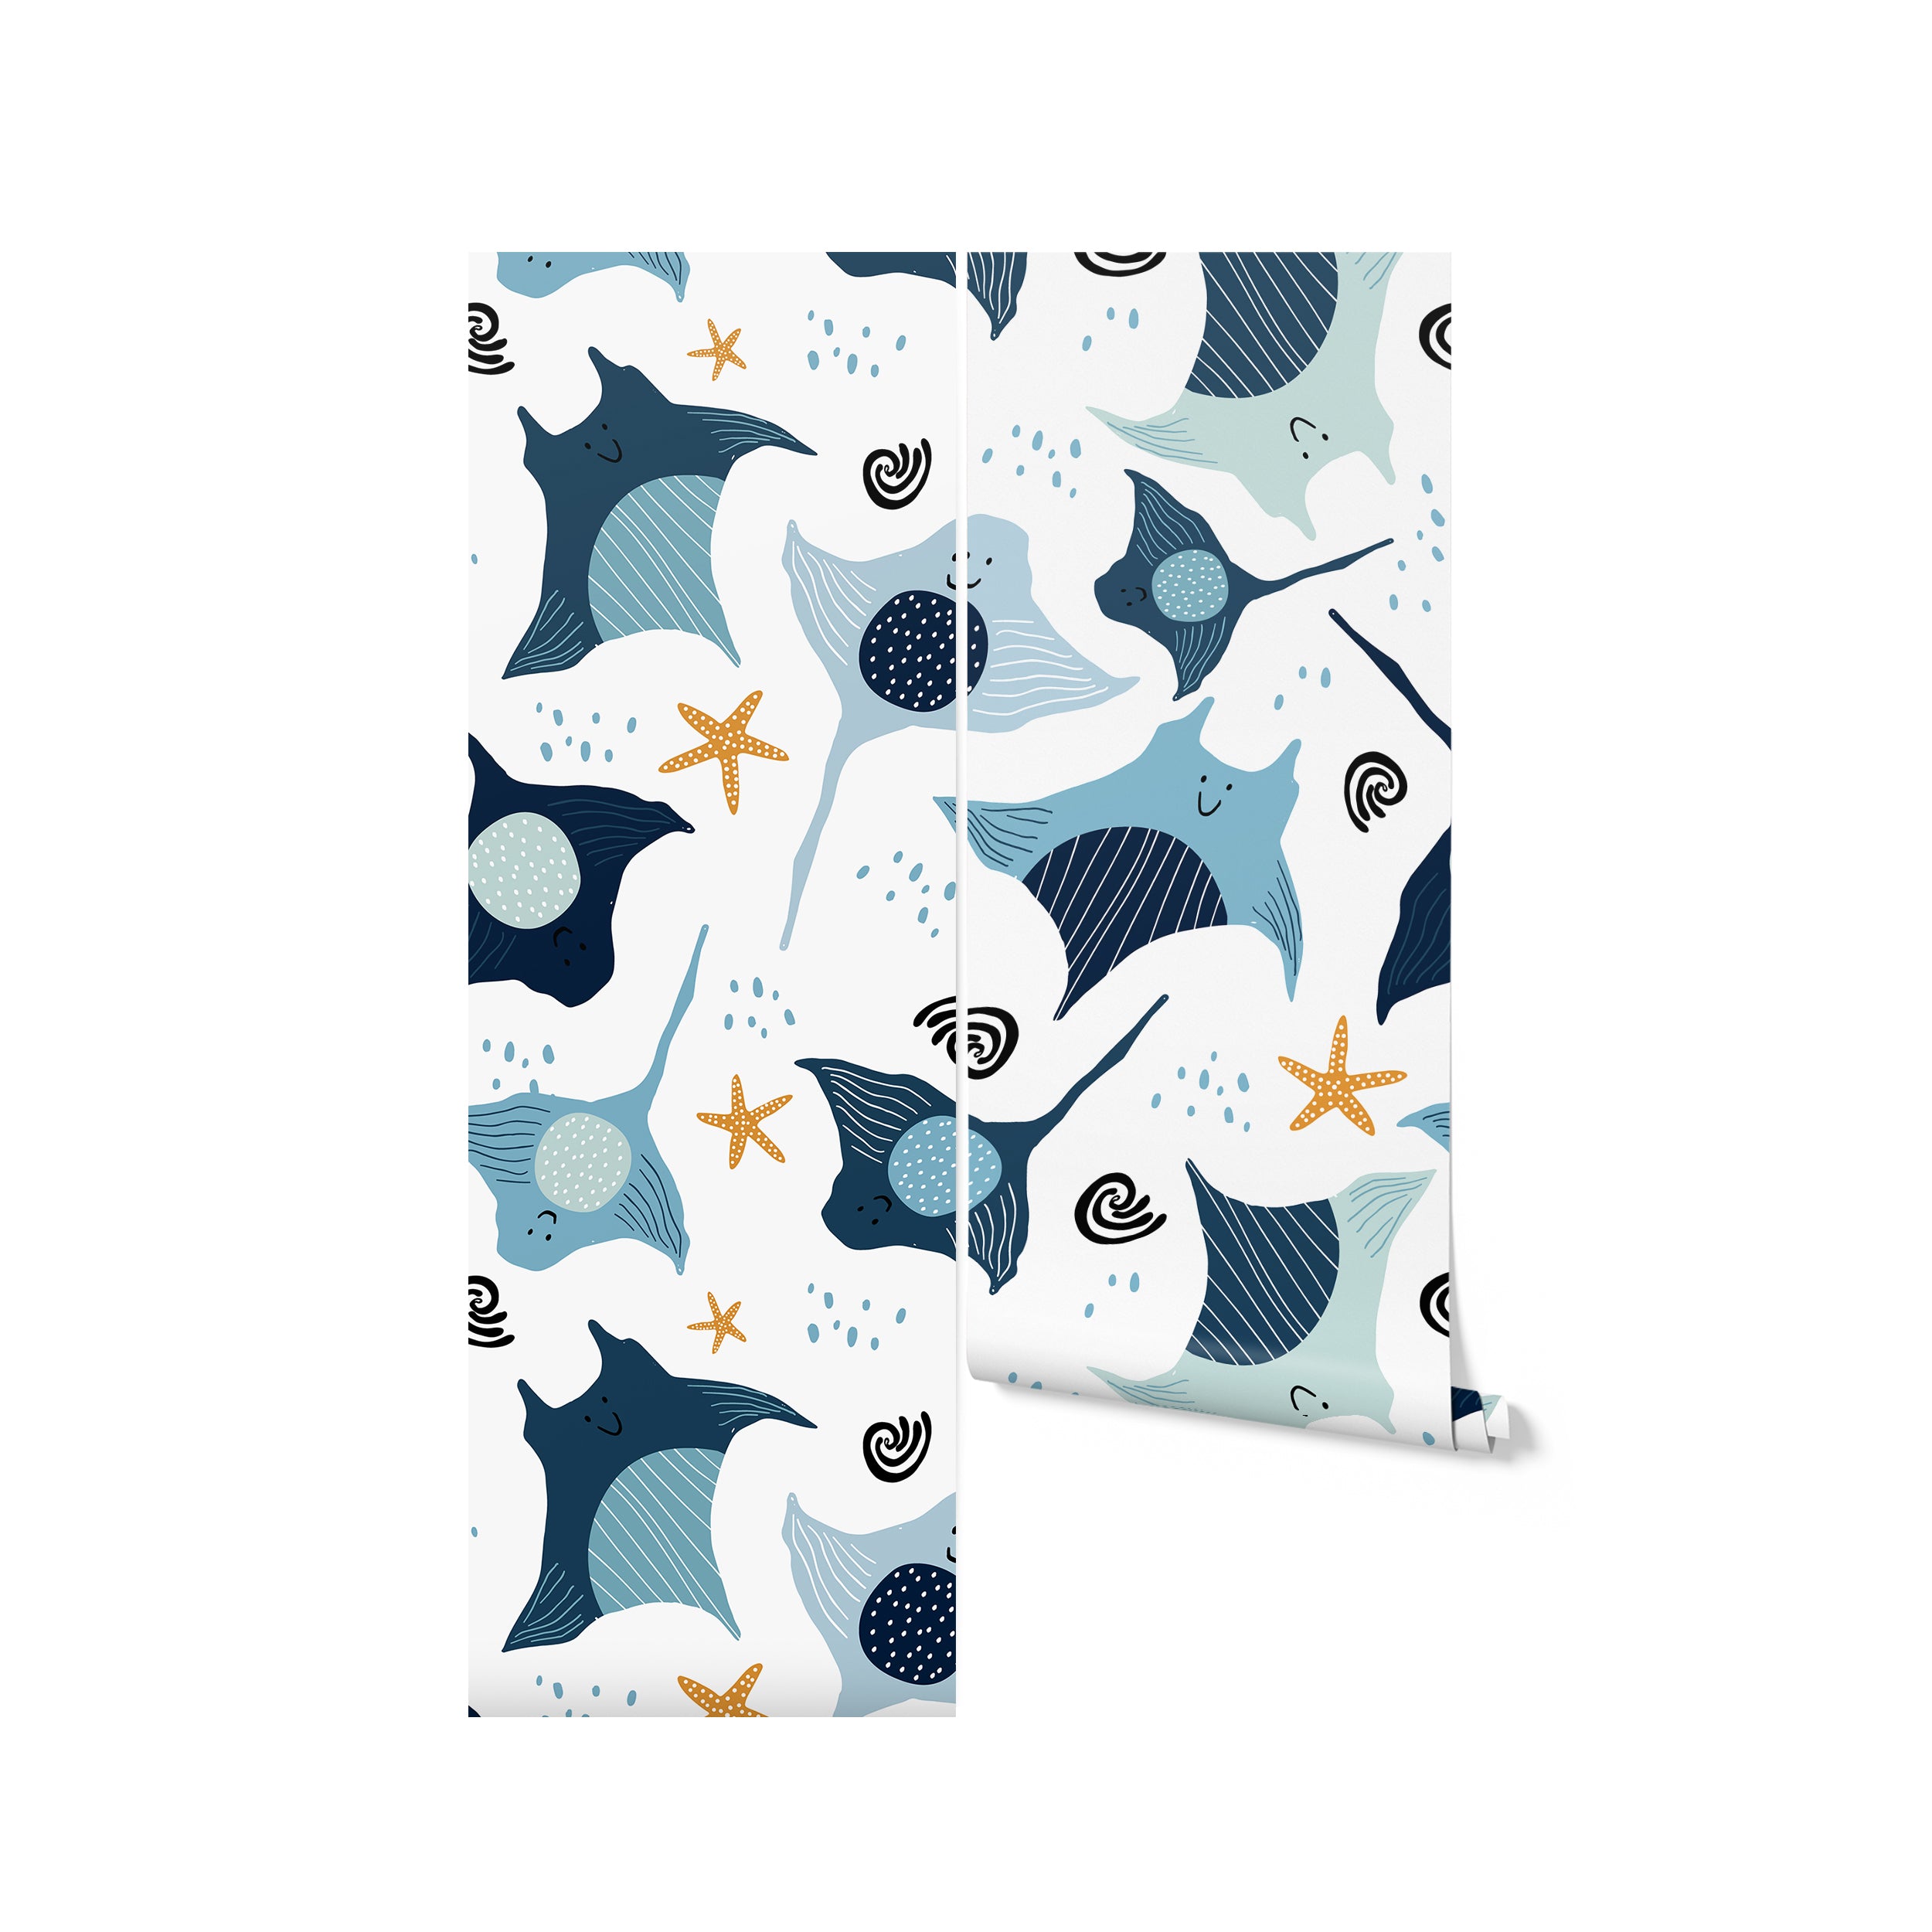 A roll of Kids Wallpaper - Smiley Rays unfurled to reveal the charming sea life pattern. The friendly faces of the stingrays and the playful details create a whimsical ocean adventure, ideal for adding character and joy to a child's bedroom or play area.